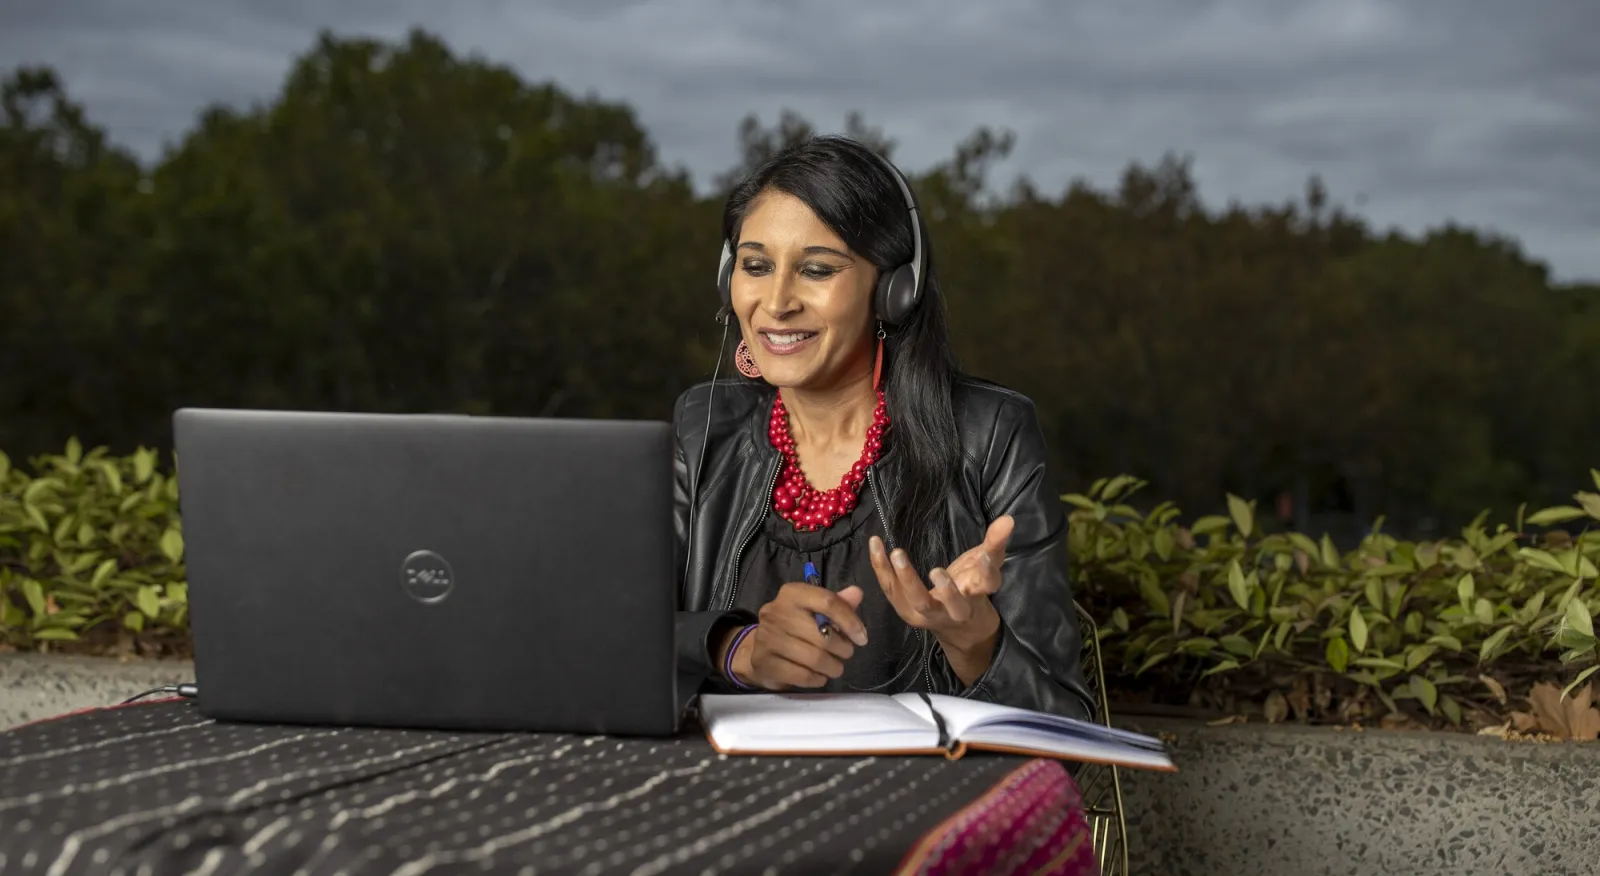 A woman sits at a laptop, wearing a black jacket and tanktop as well as a bright red necklace. She is outside, and has headphones on. It looks like she is mid conversation with someone on screen.